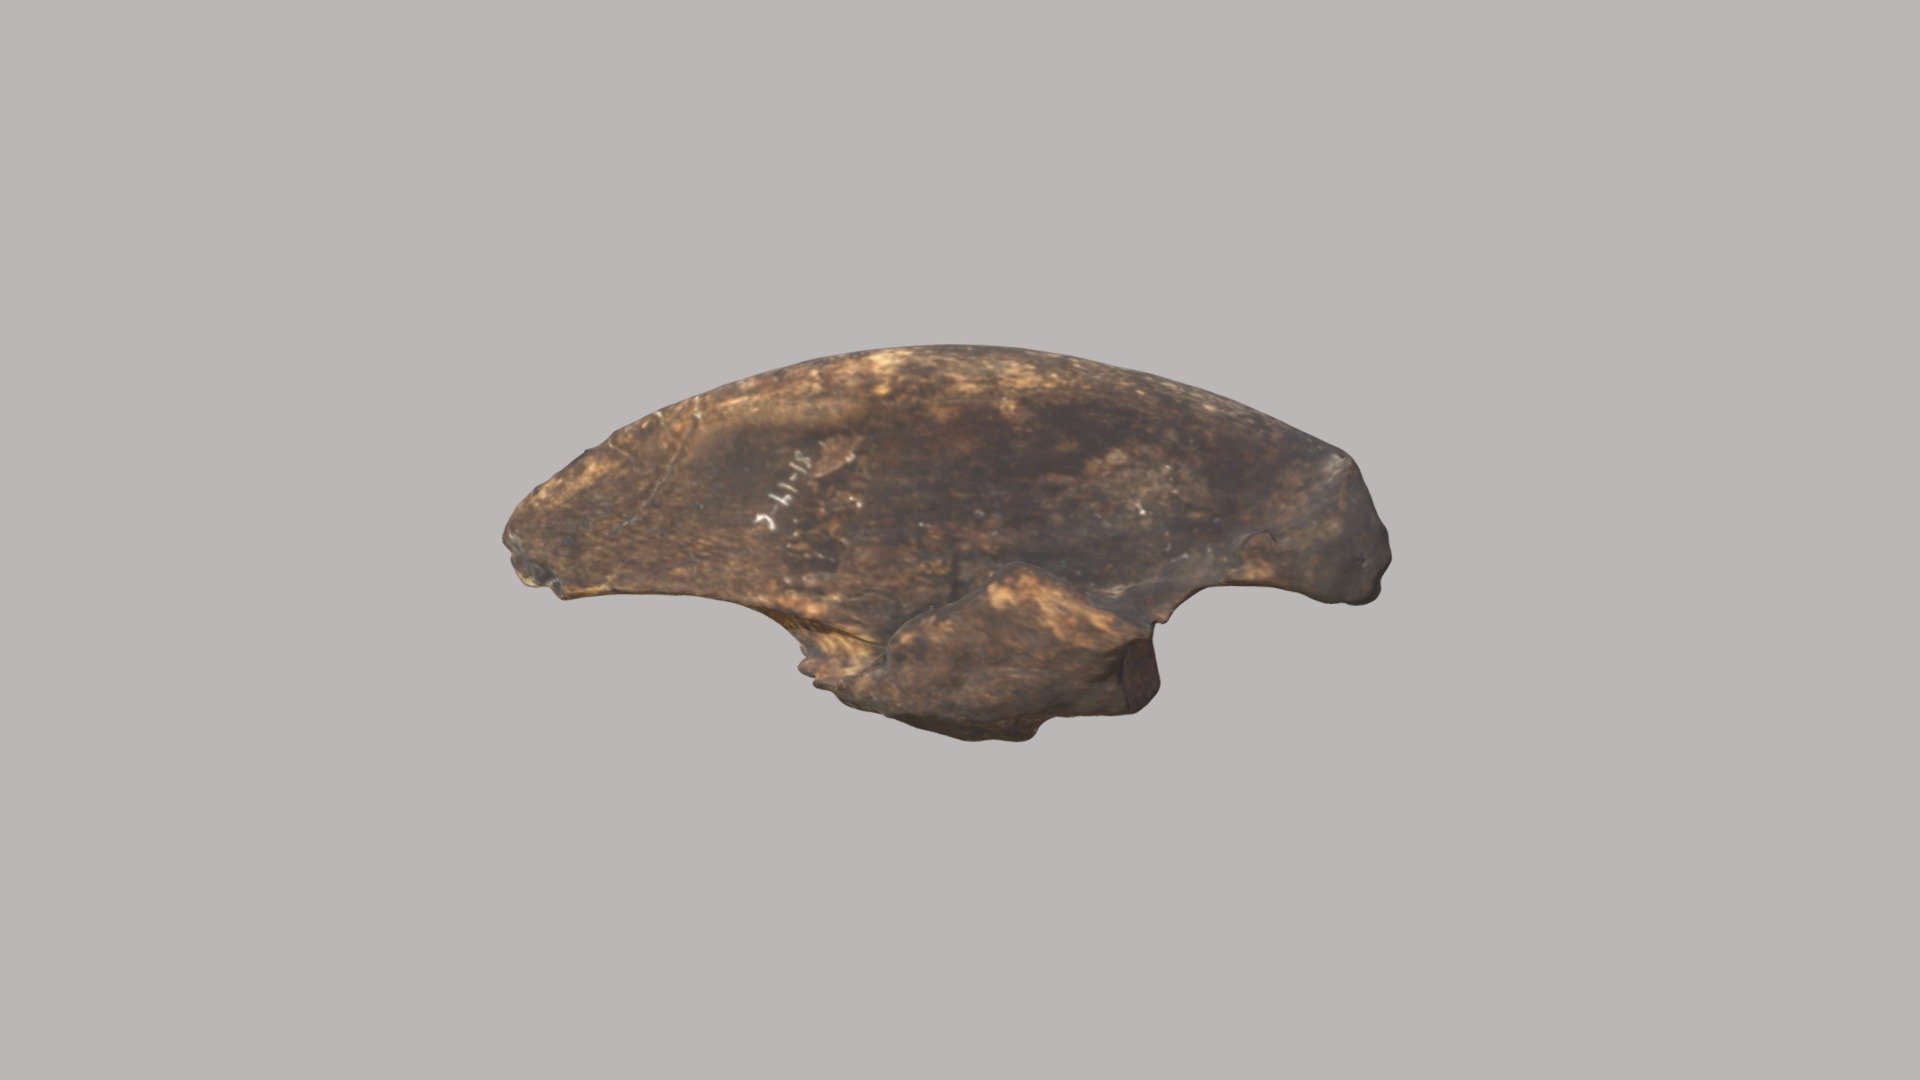 This is a toe bone/claw (terminal phalange) of the Megalonyx jeffersonii specimen that was discarded from the Indiana University Museum in 1947.

The digital model was created by the Indiana Geological and Water Survey using a Go!Scan 3D scanner on the Indiana State Museum specimen 71.3.73.4 3d model